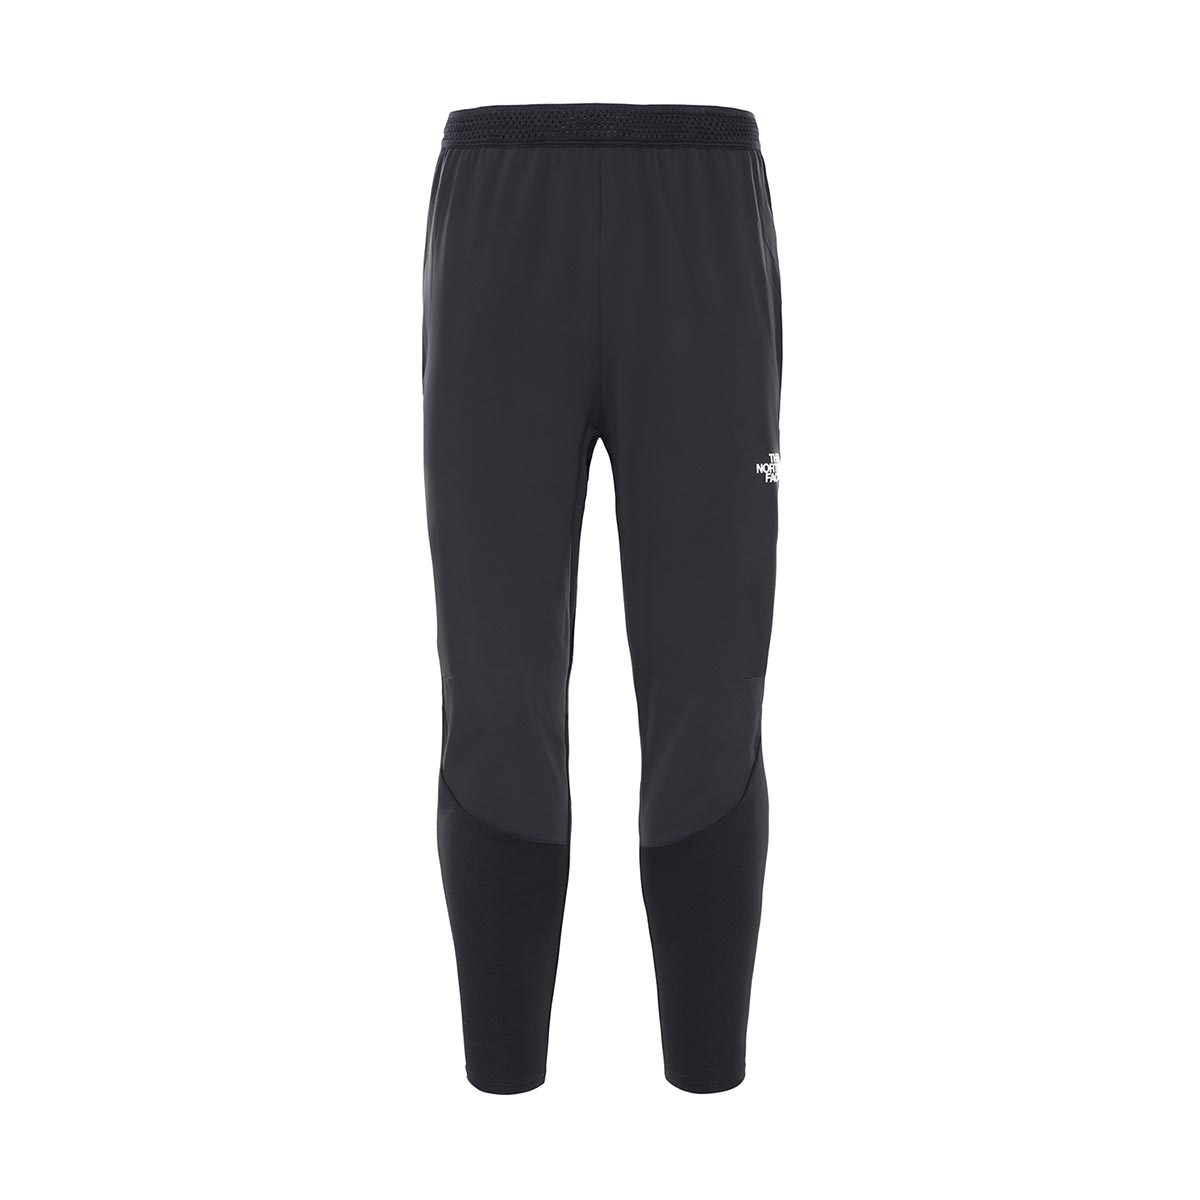 THE NORTH FACE - ACTIVE TRAIL HYBRID JOGGERS